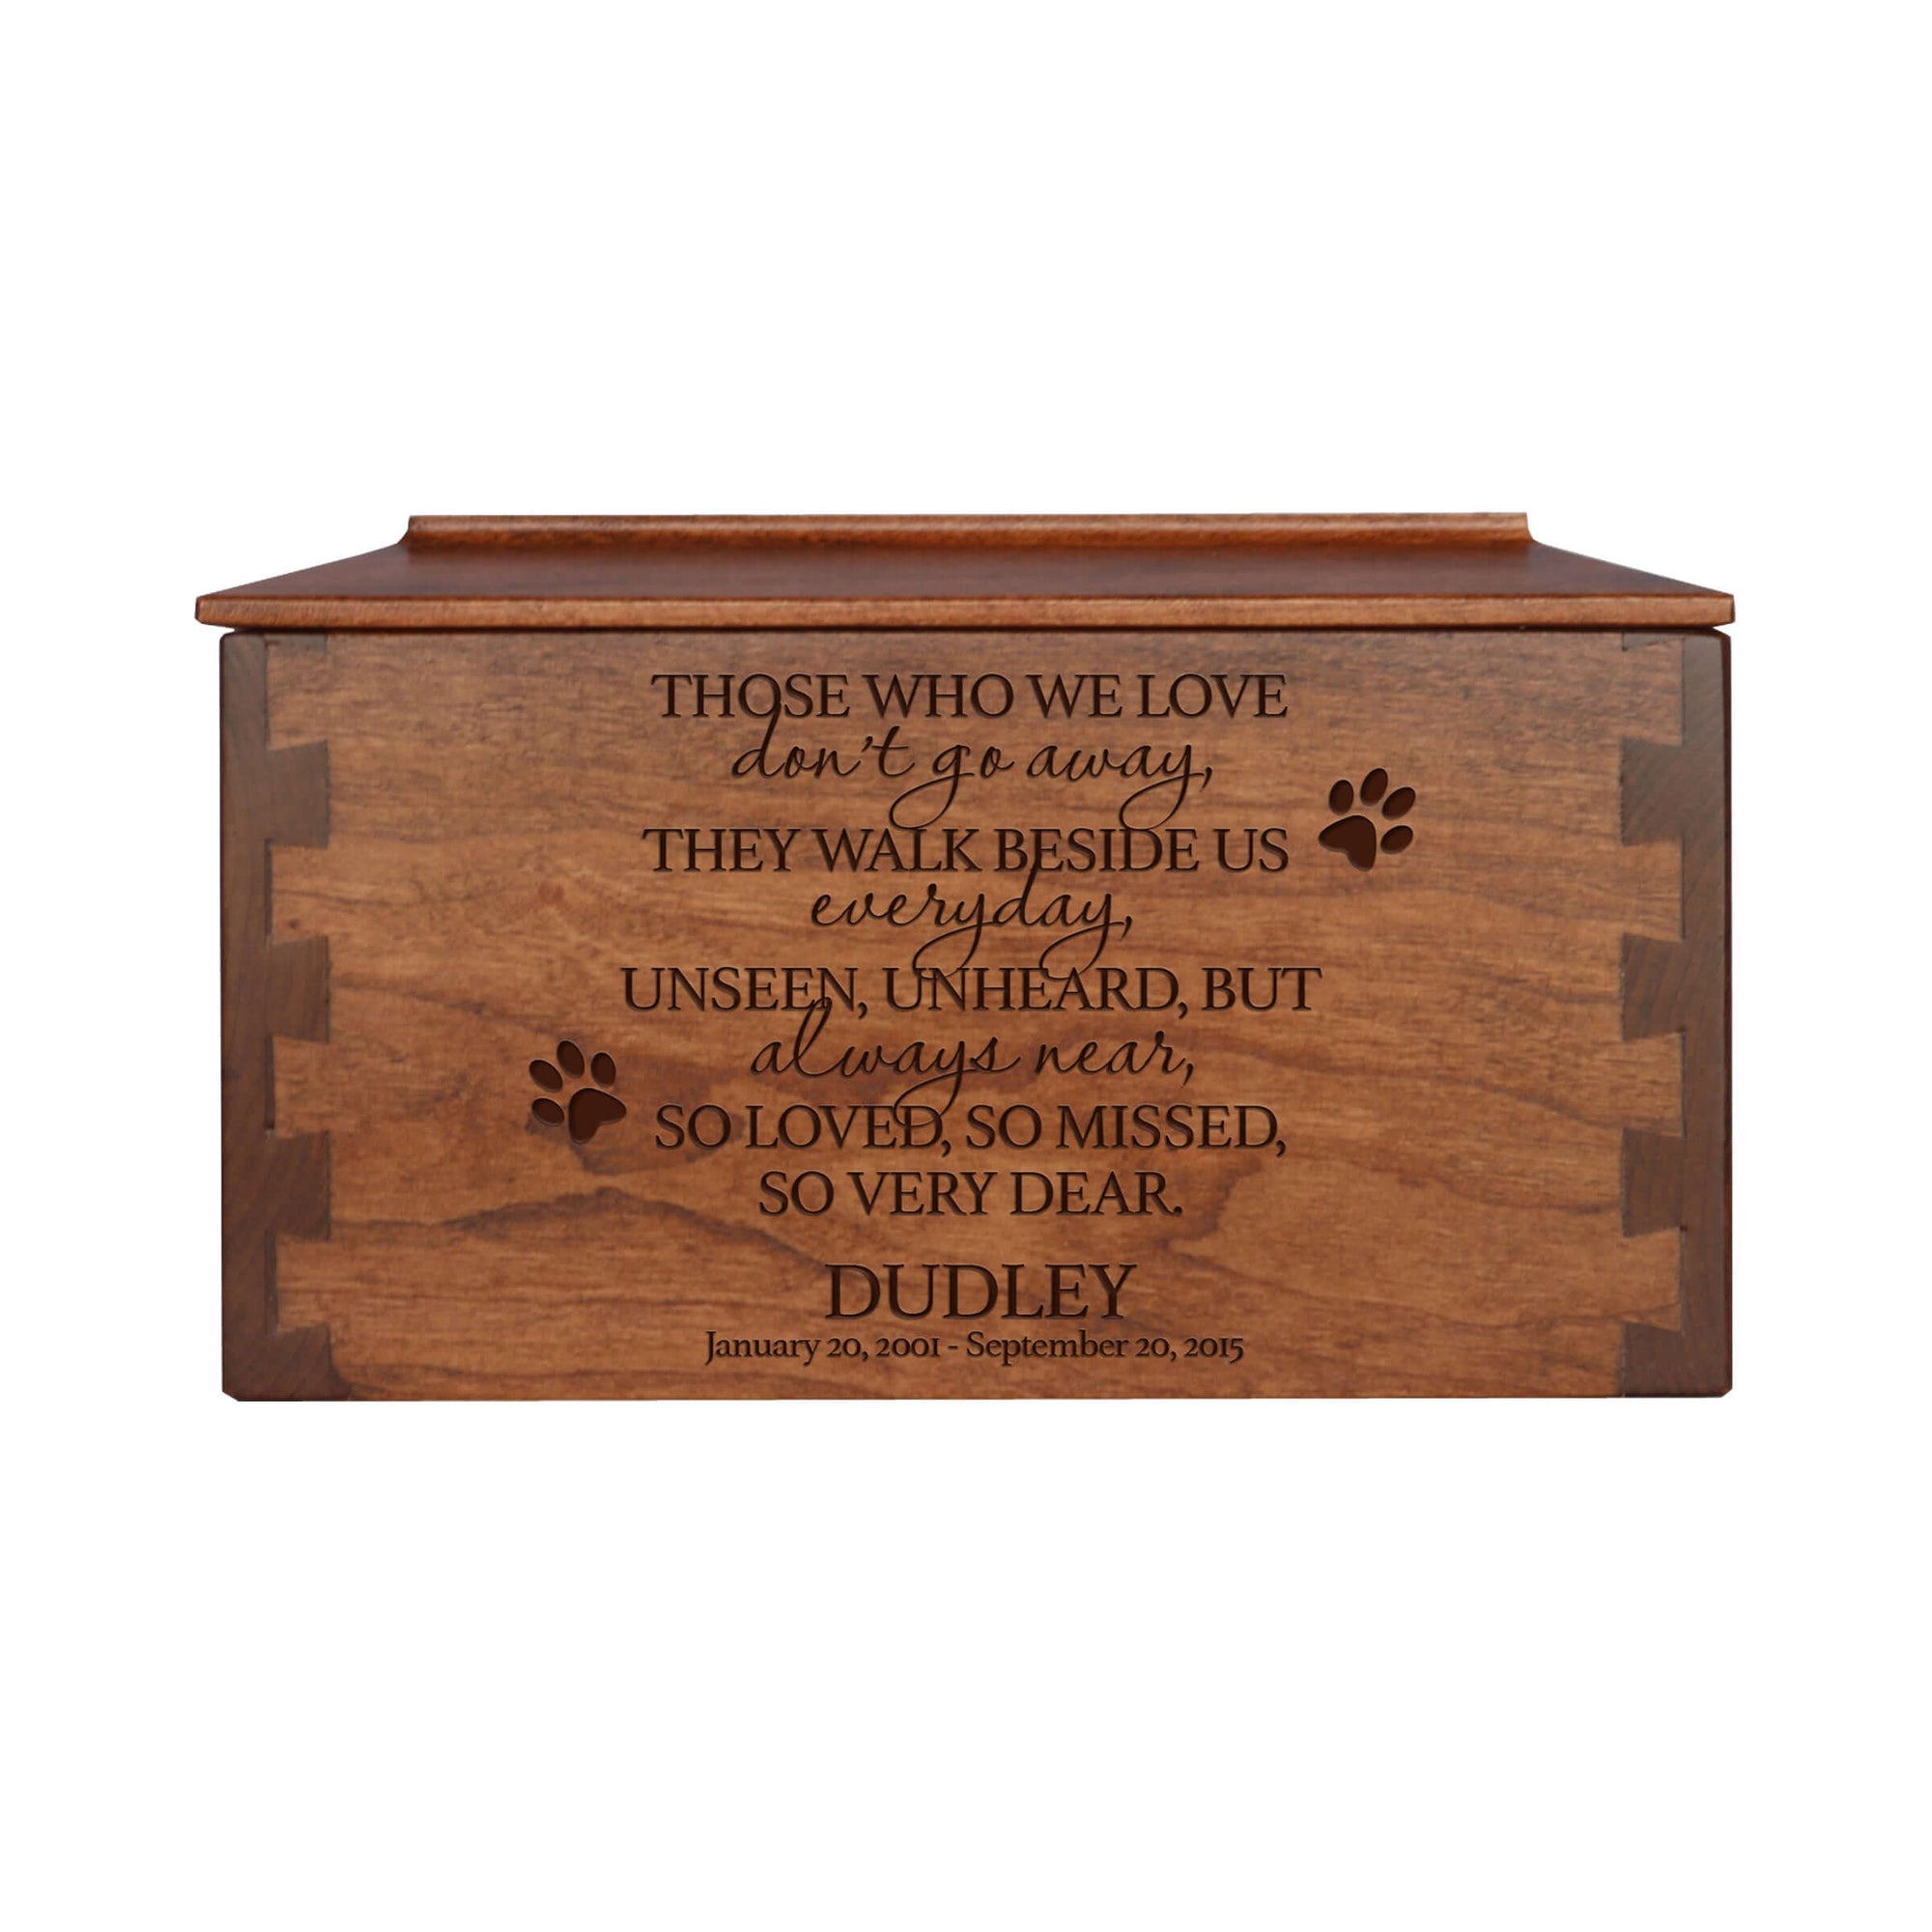 Pet Memorial Dovetail Cremation Urn Box for Dog or Cat - Those Who We Love Don't Go Away